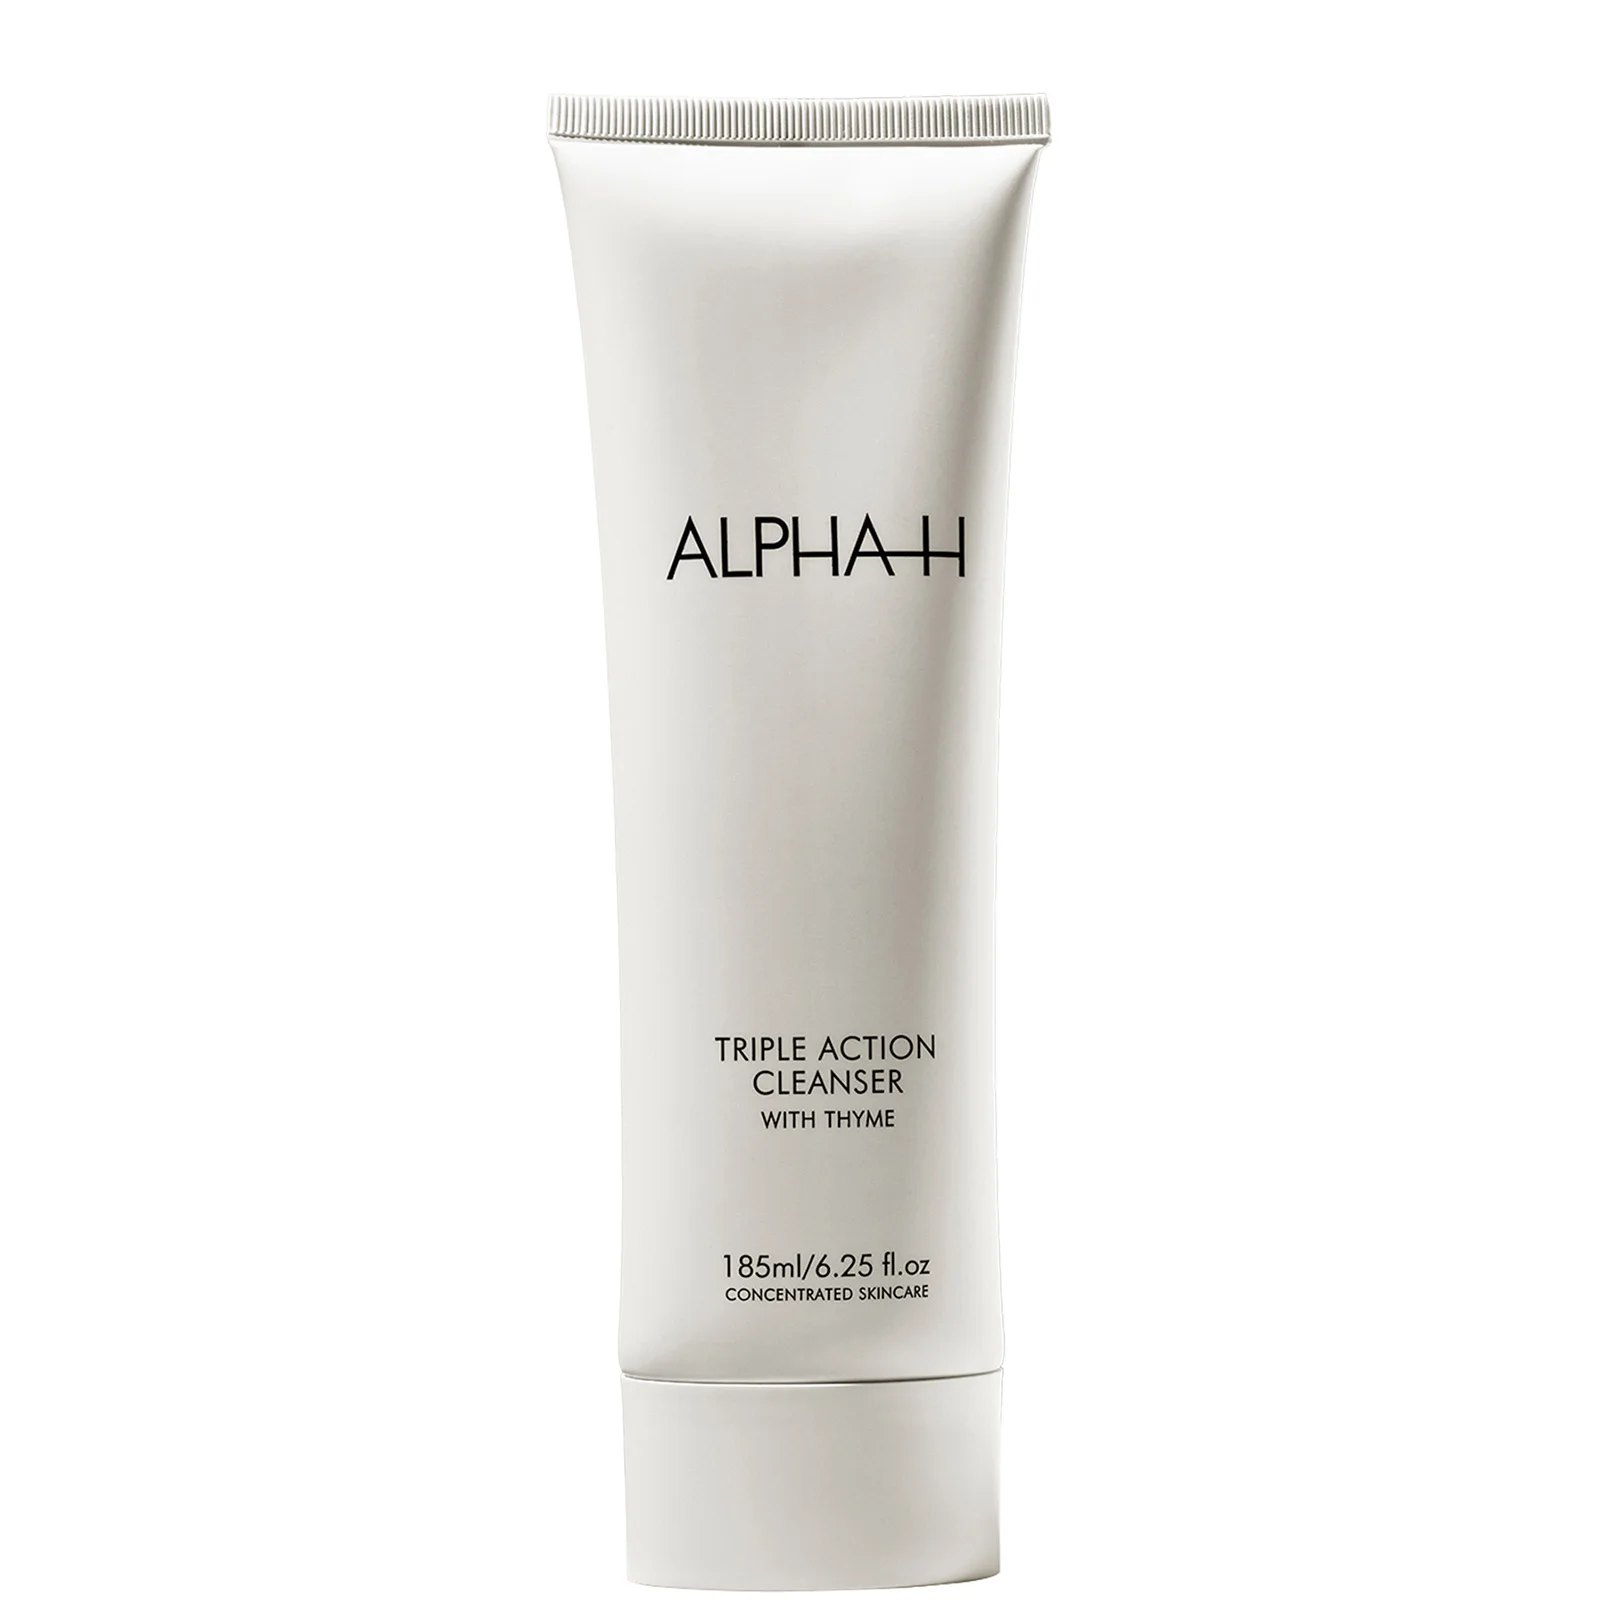 Alpha-H Triple Action Cleanser with Thyme 185ml Image 1